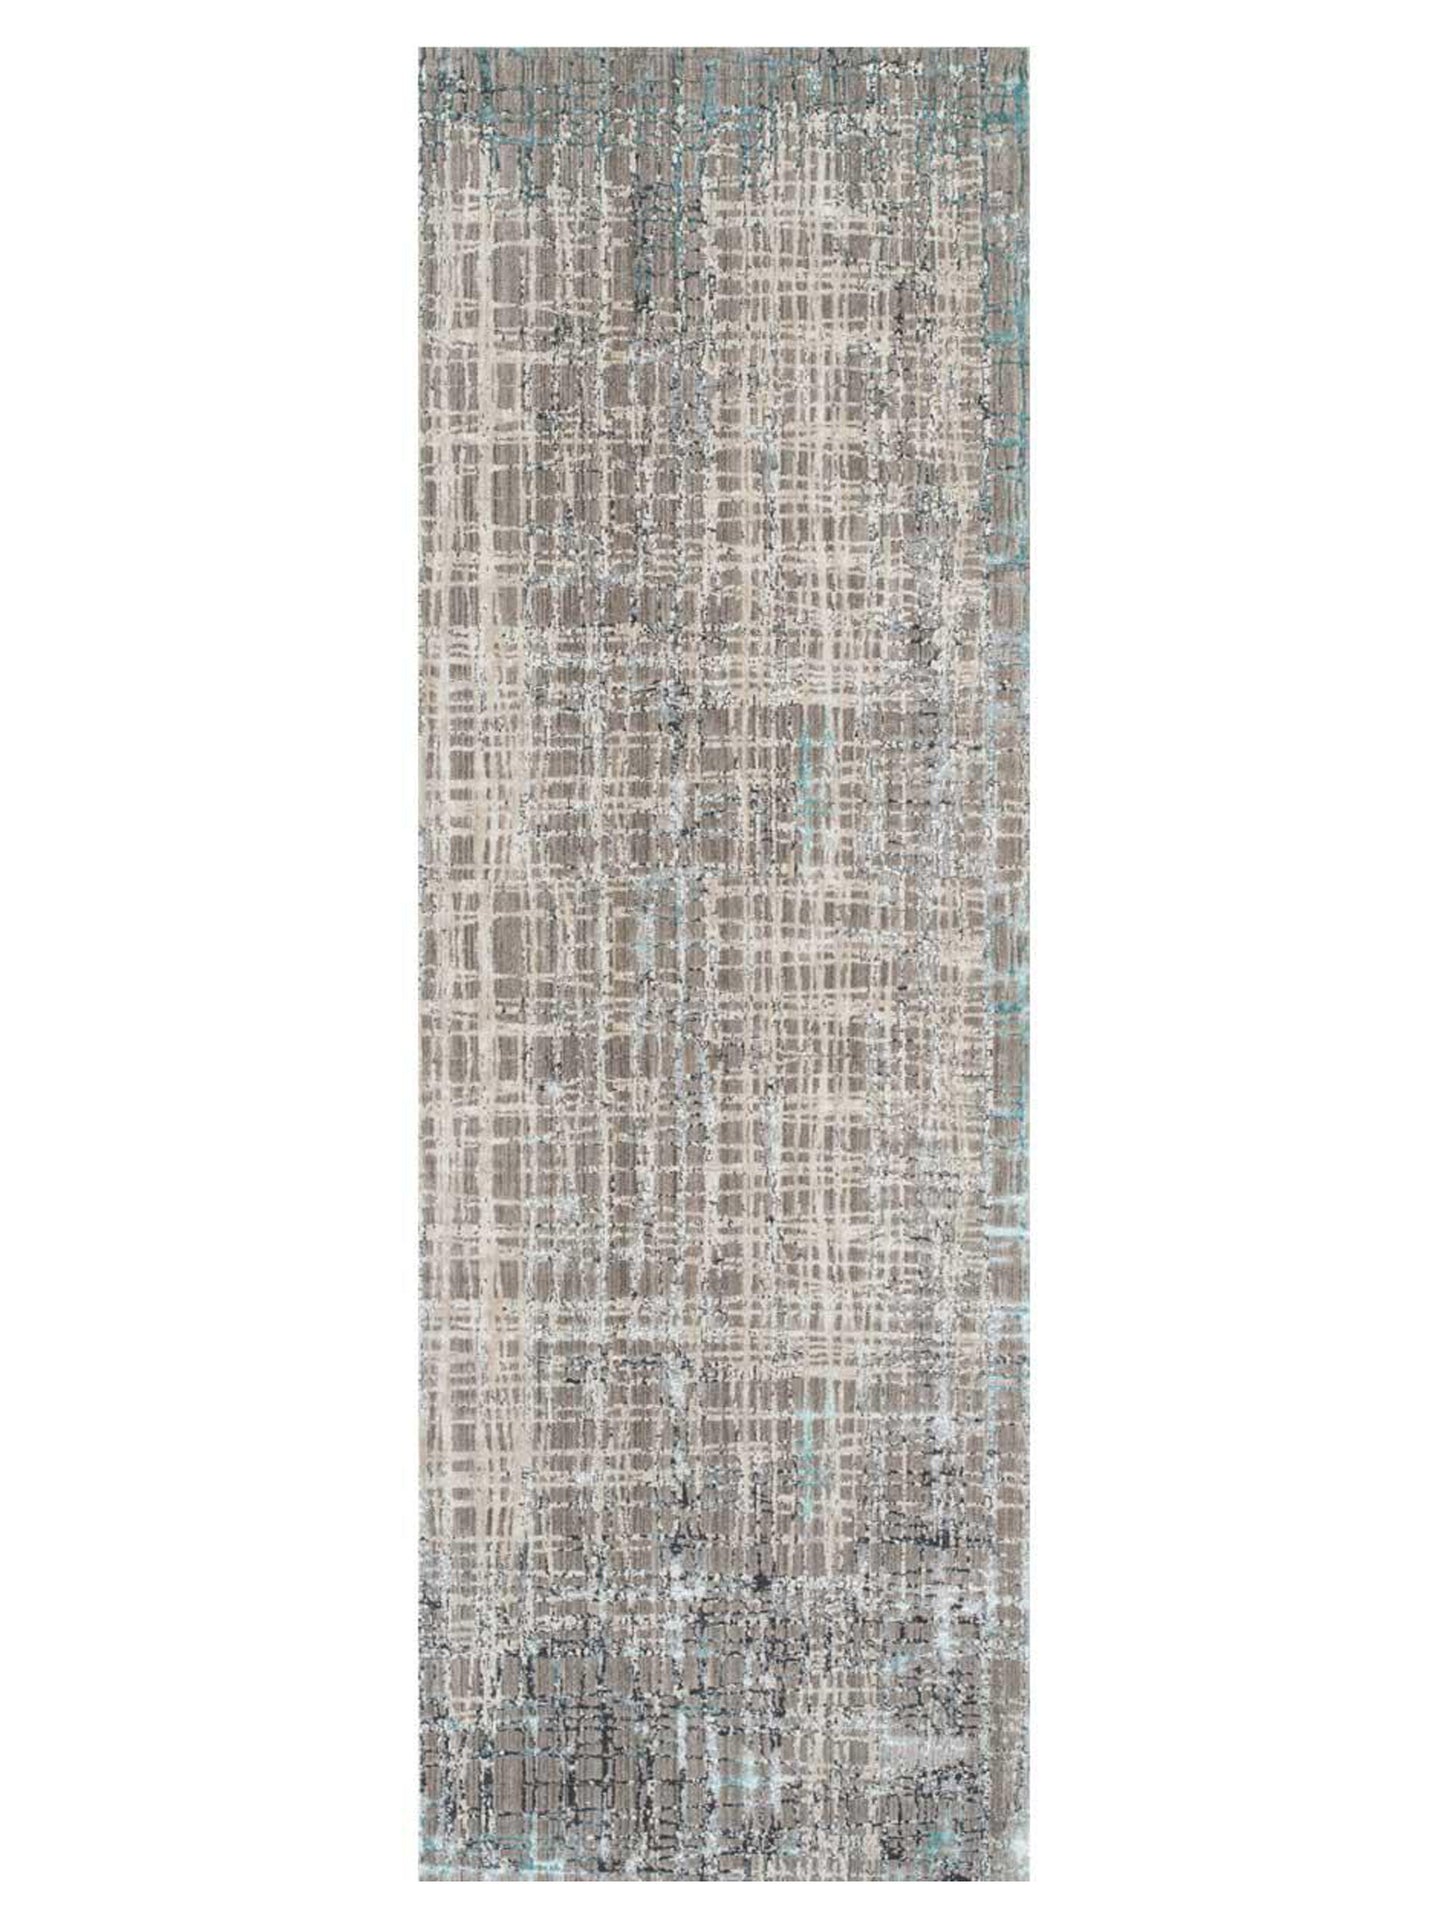 Limited Rosy RO-518 BLUE  Transitional Machinemade Rug